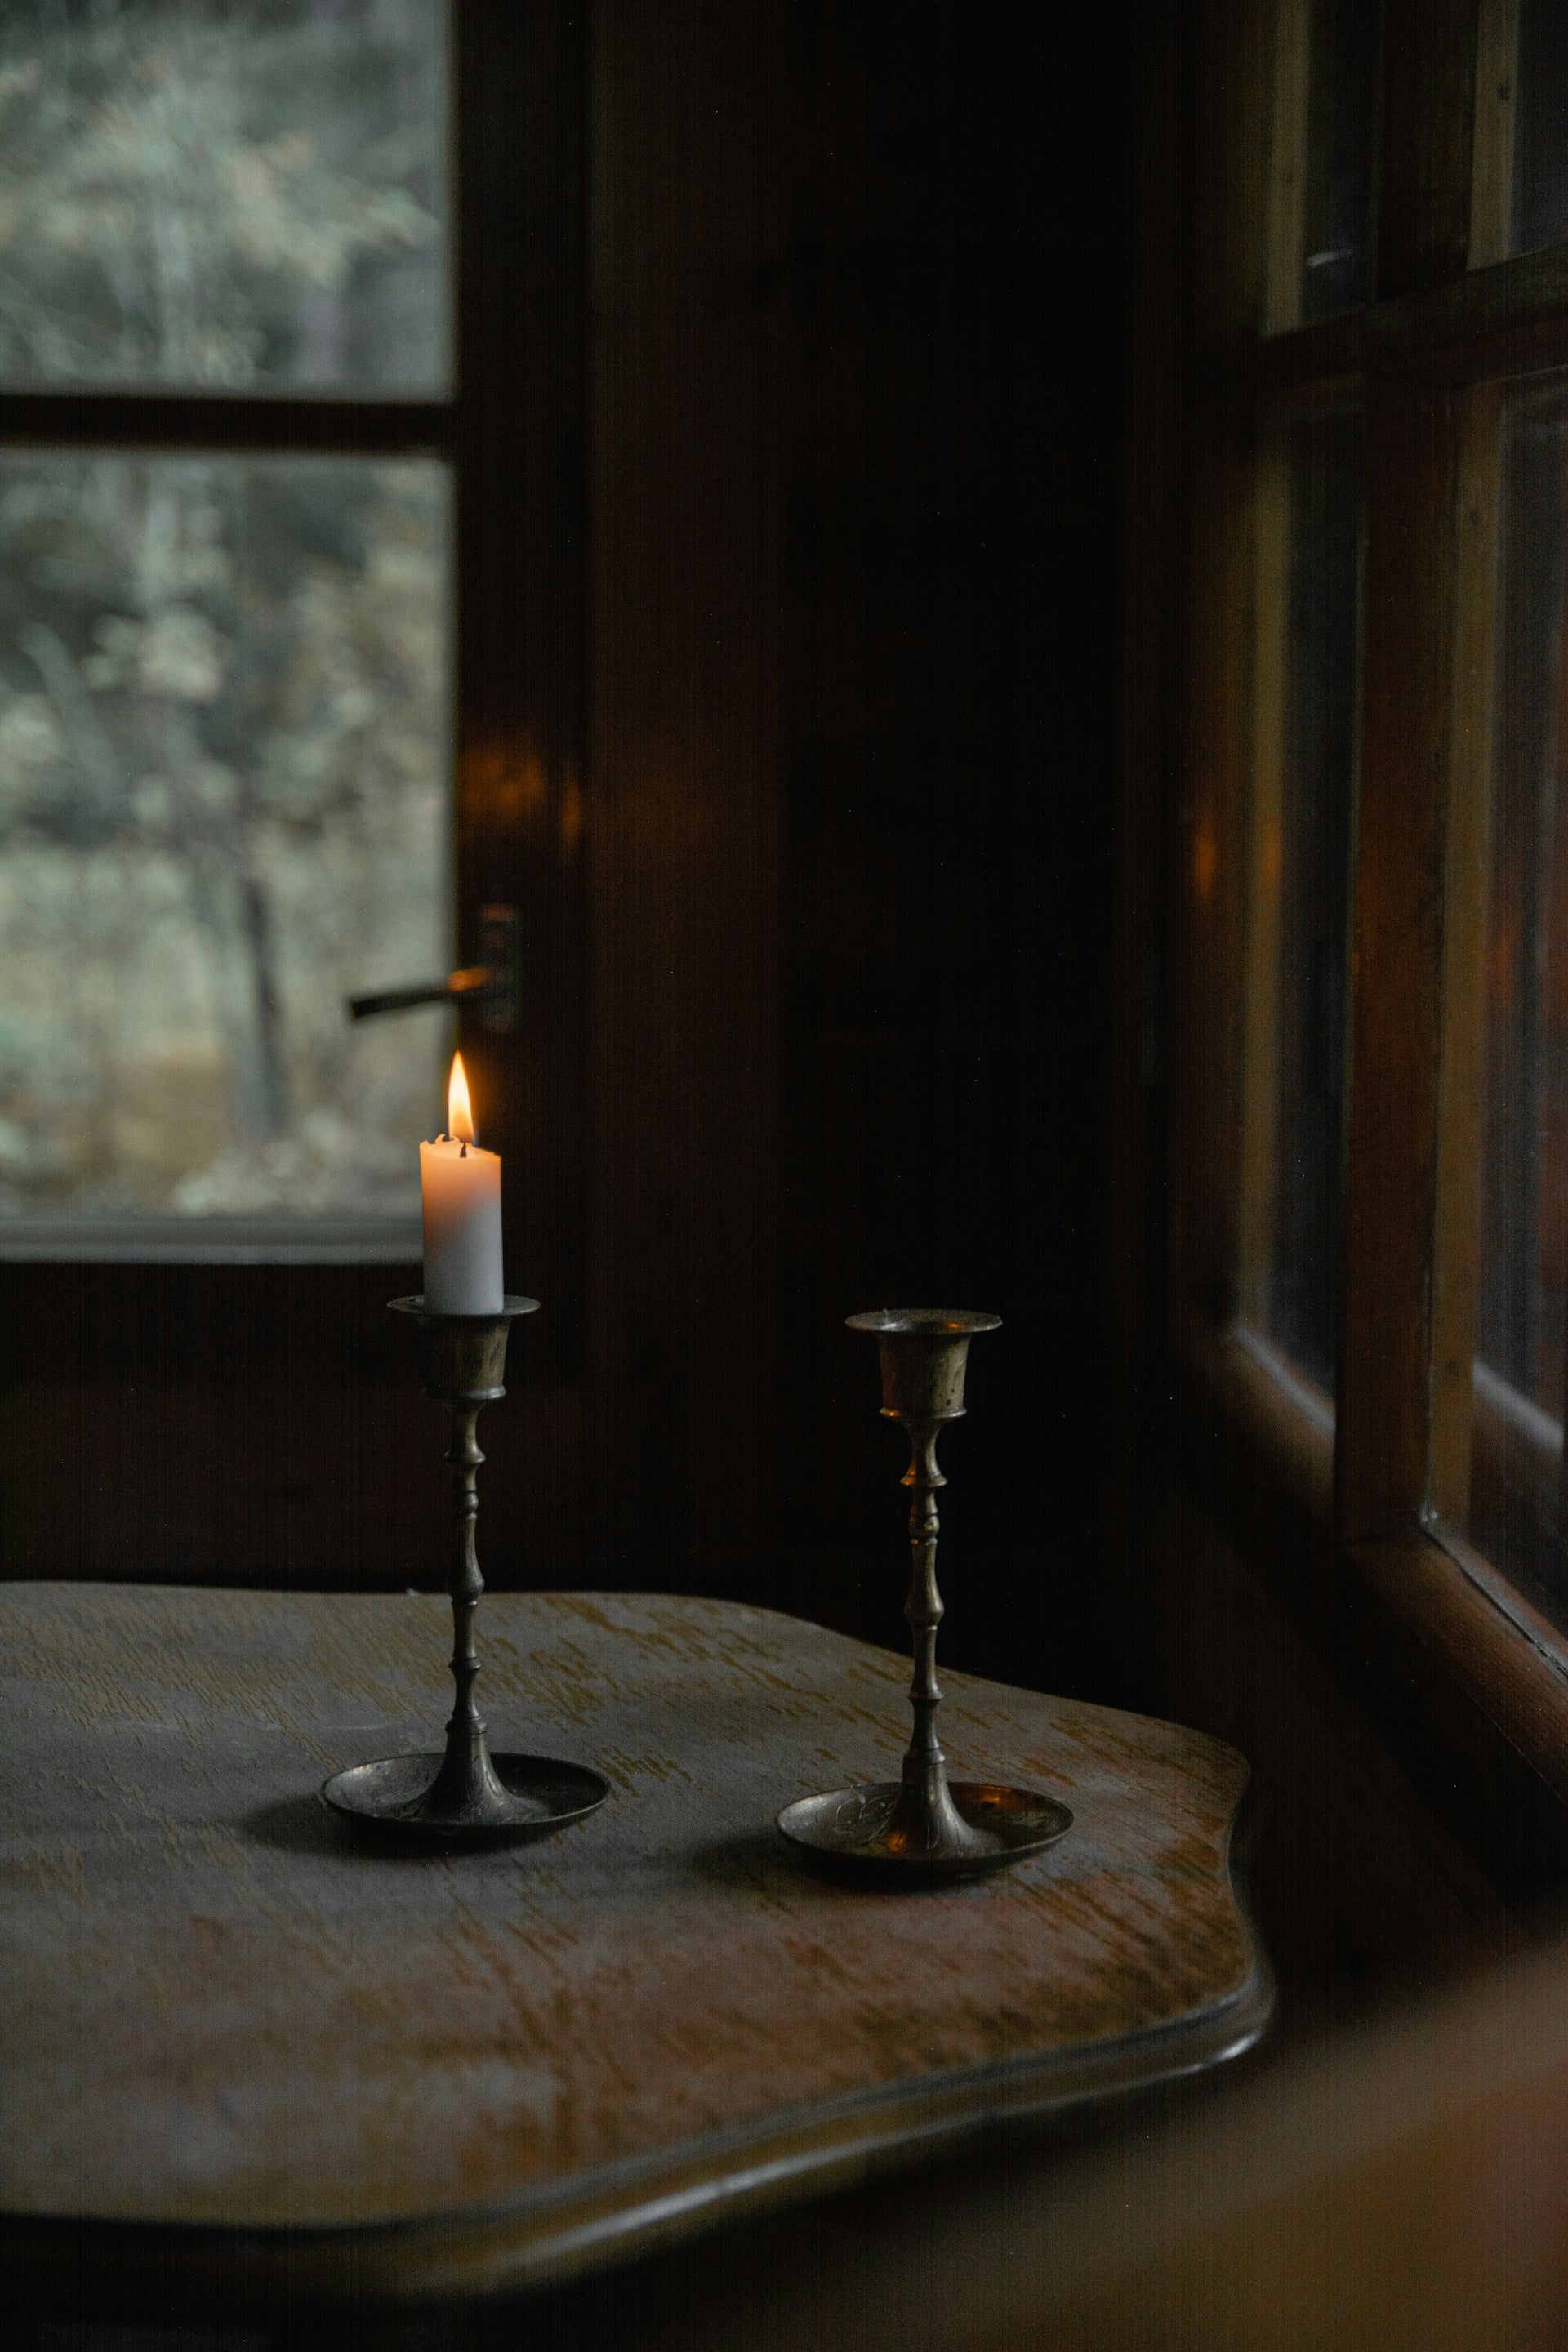 Two candles sitting on a table in front of a window.